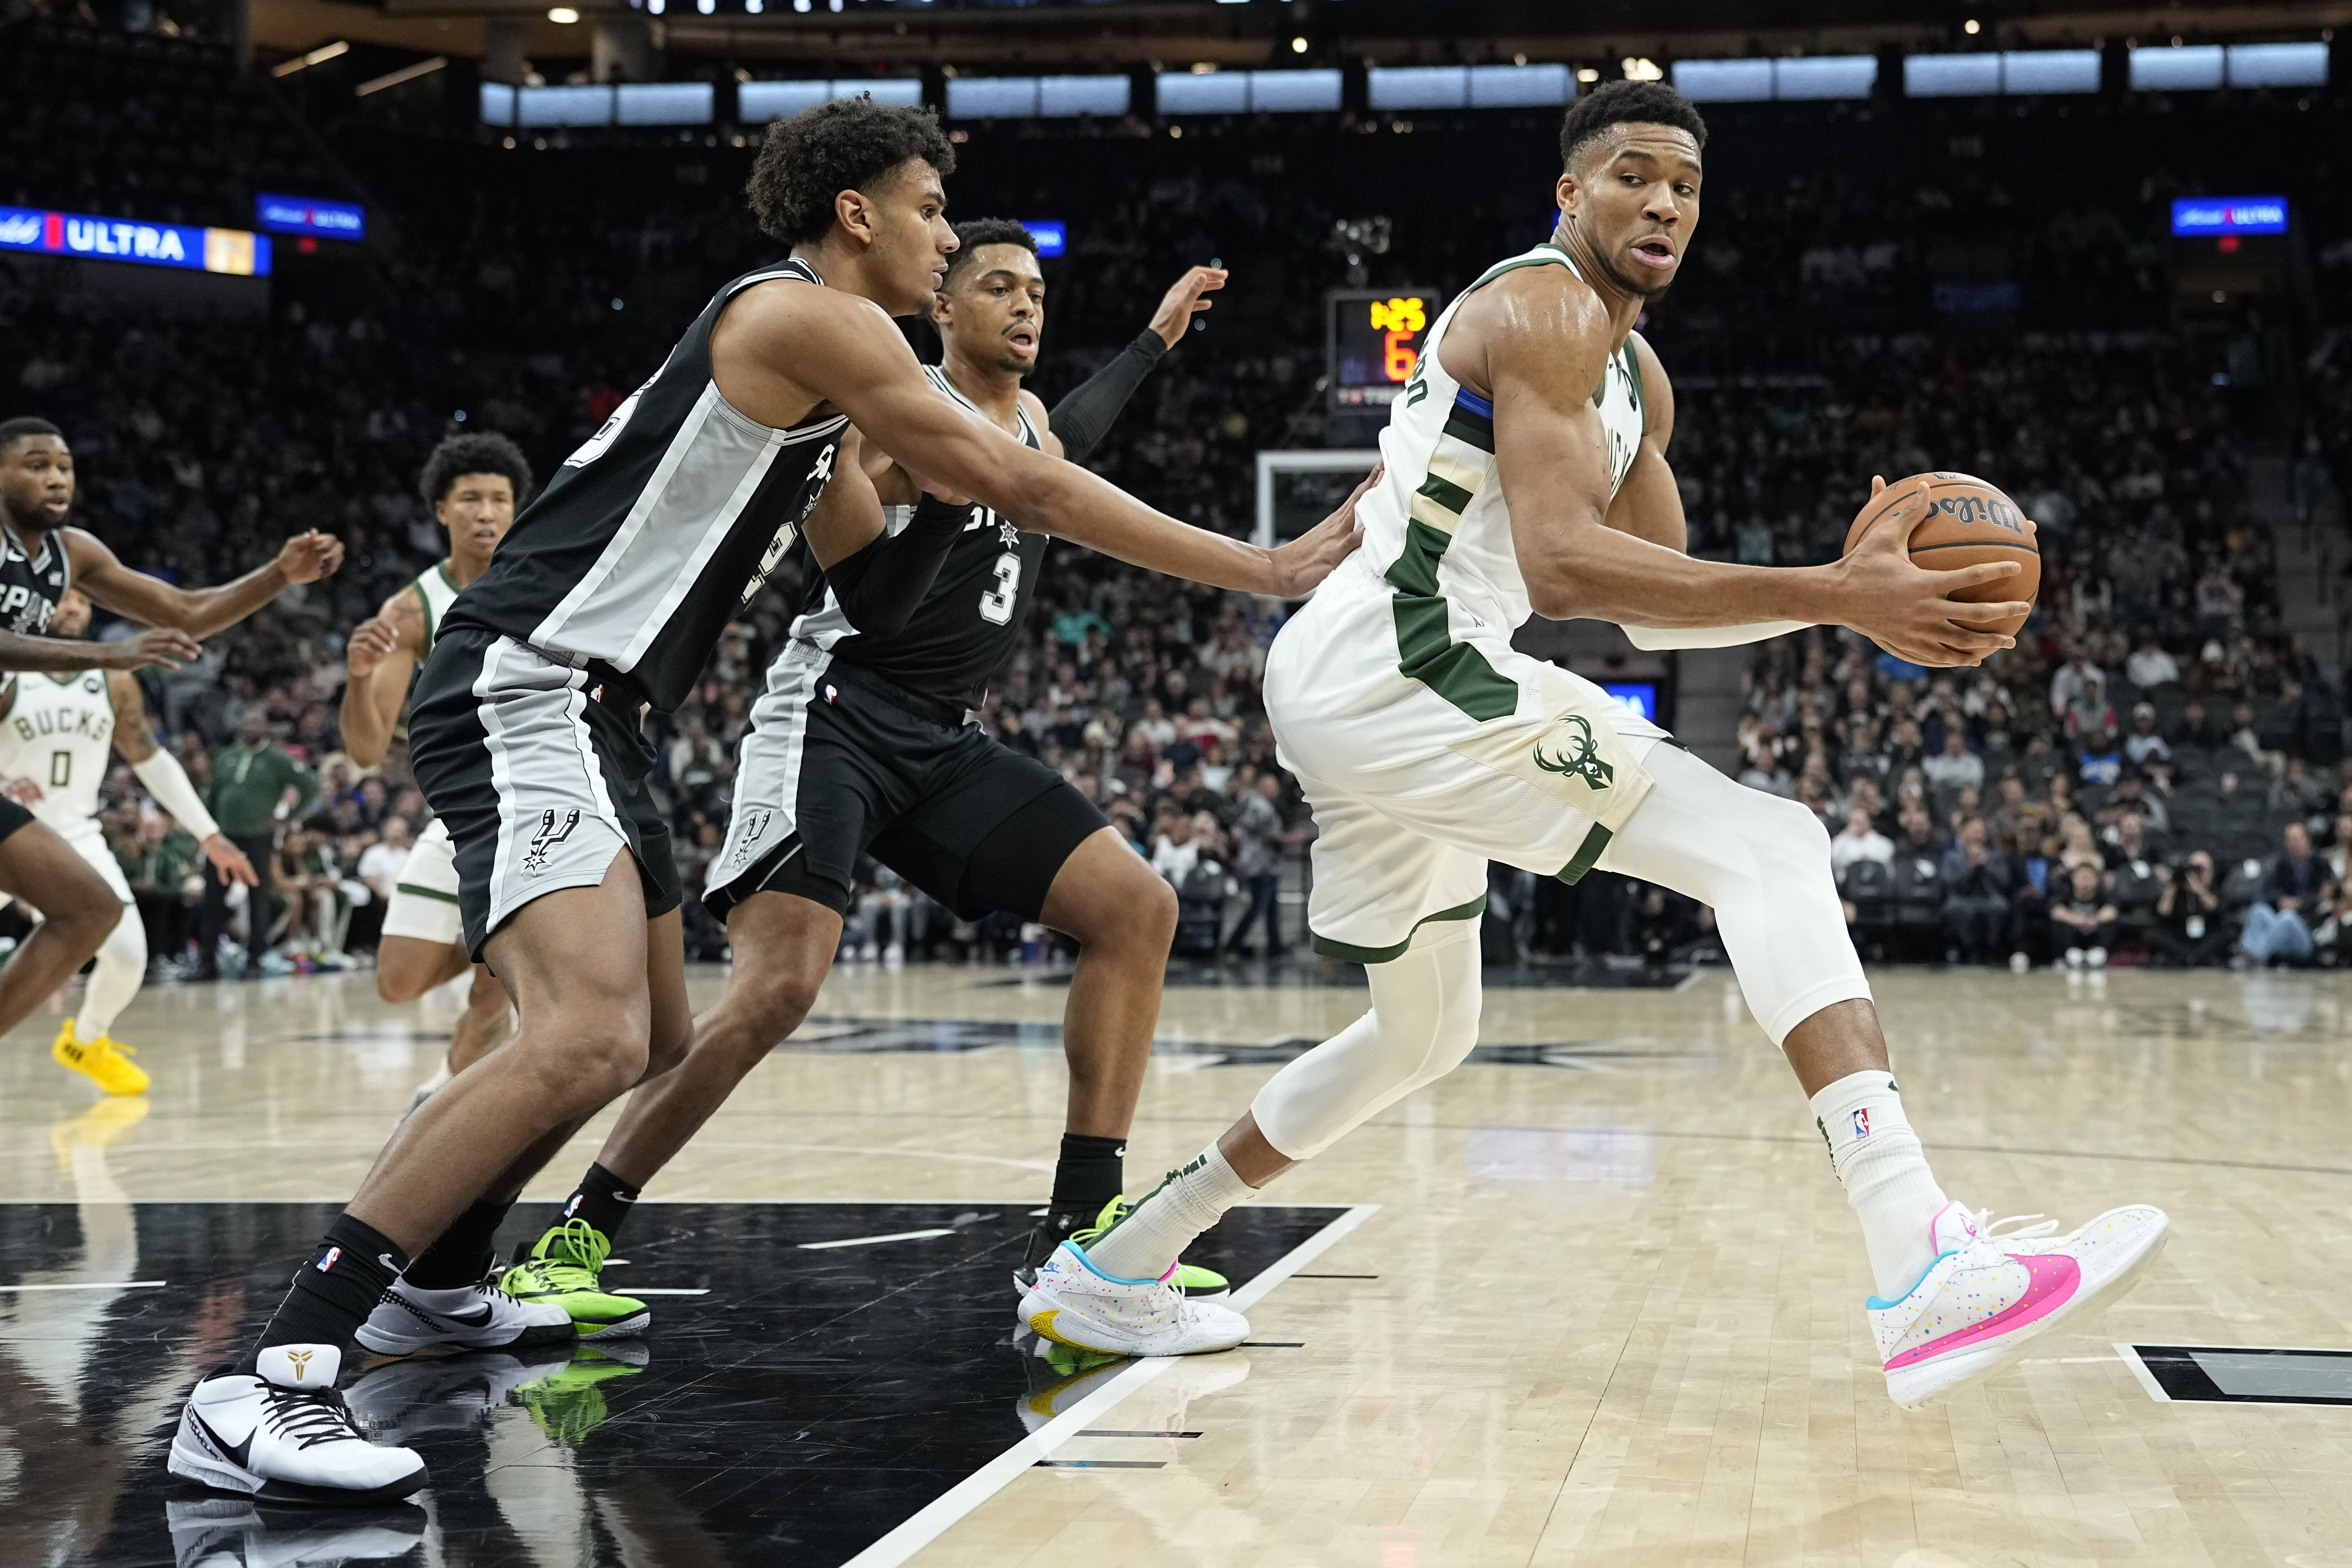 Photo: giannis record vs spurs